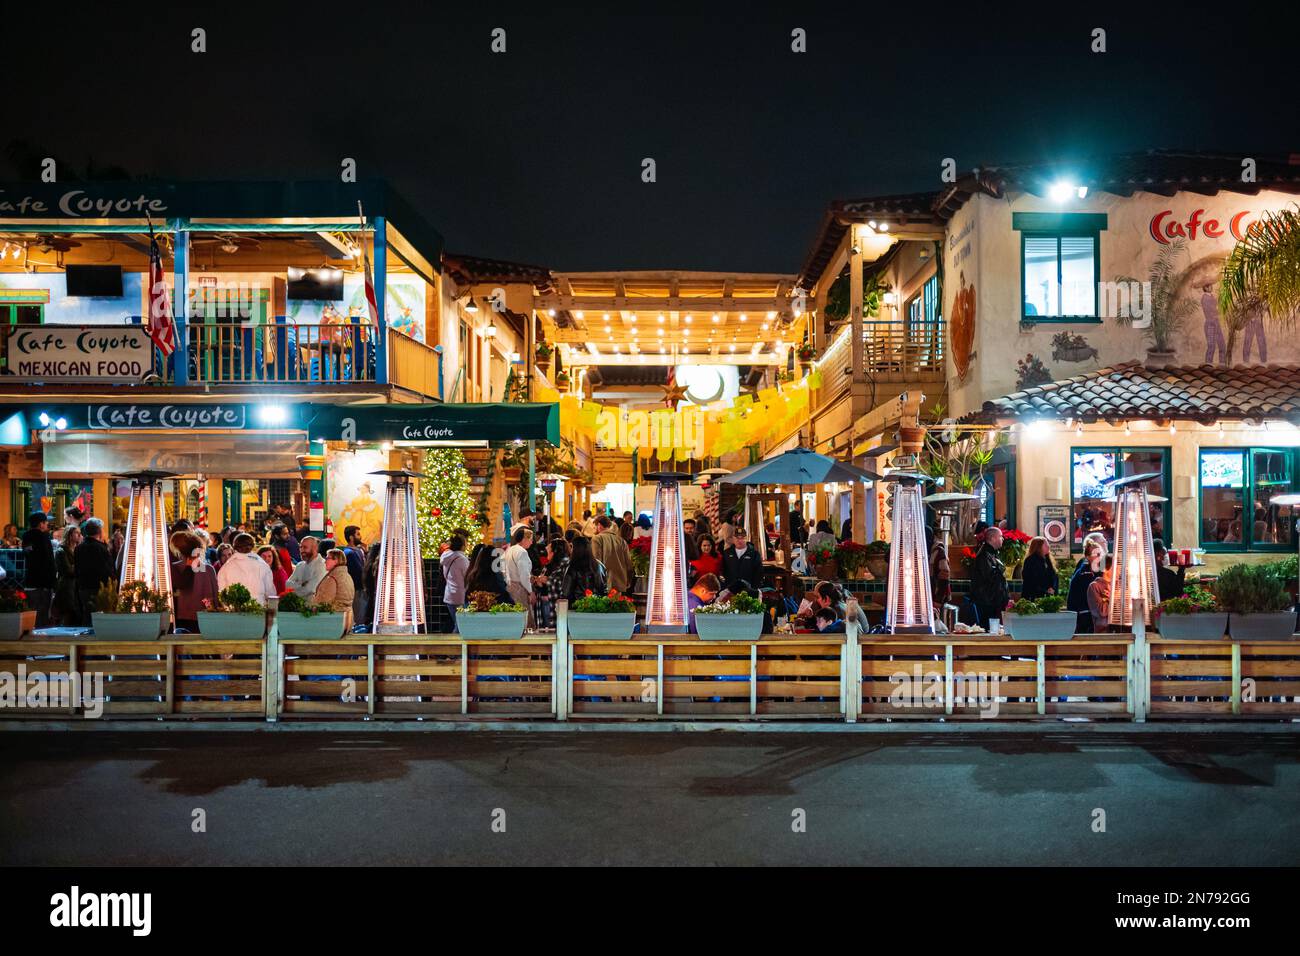 San Diego, CA, USA - Dec 27, 2022: Tourist of Old Town San Diego enjoy dinner and the night life at an outdoor restaurant during a December evening. Stock Photo